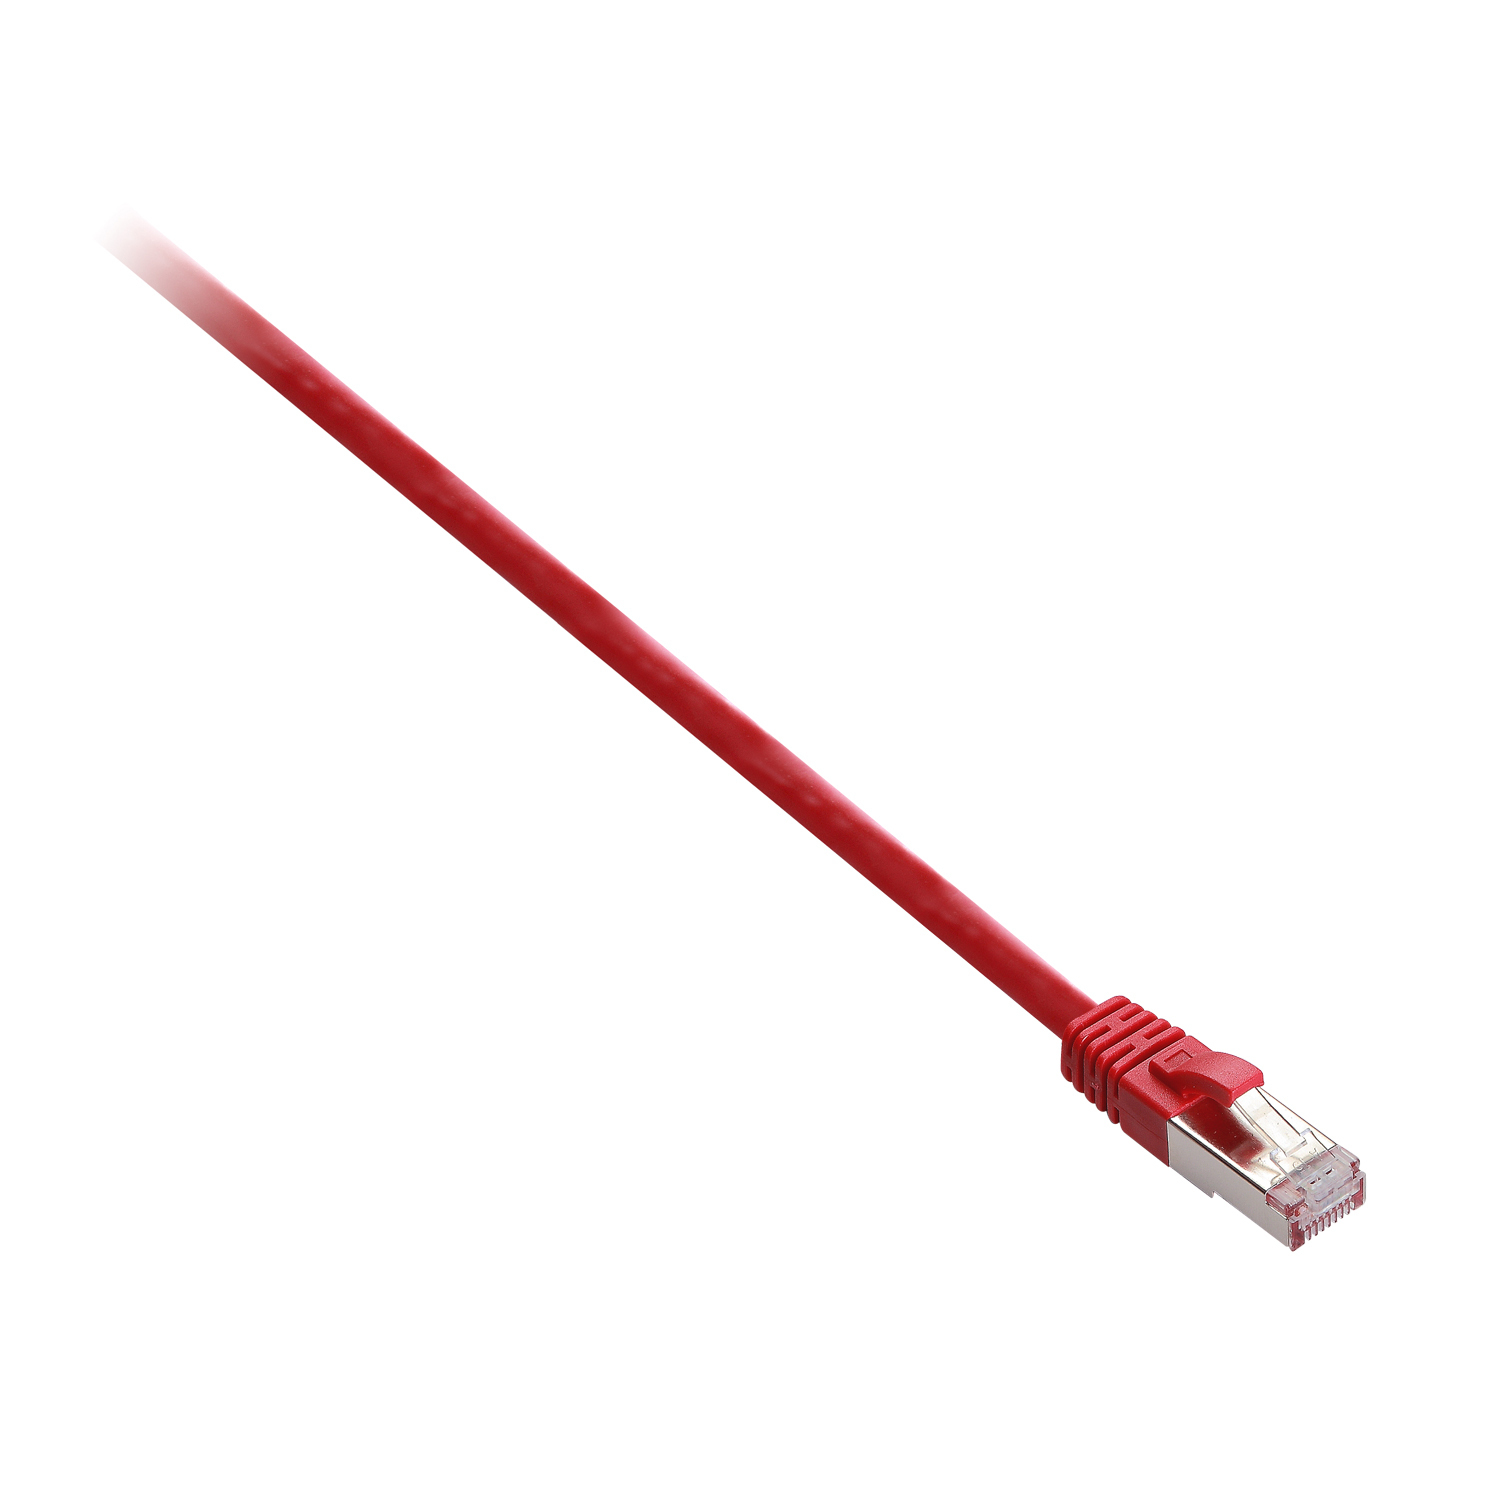 Cavo di Rete Cat6e Stp 1m Rosso V7 Cables V7e2c6s 01m Rds 4038489019721